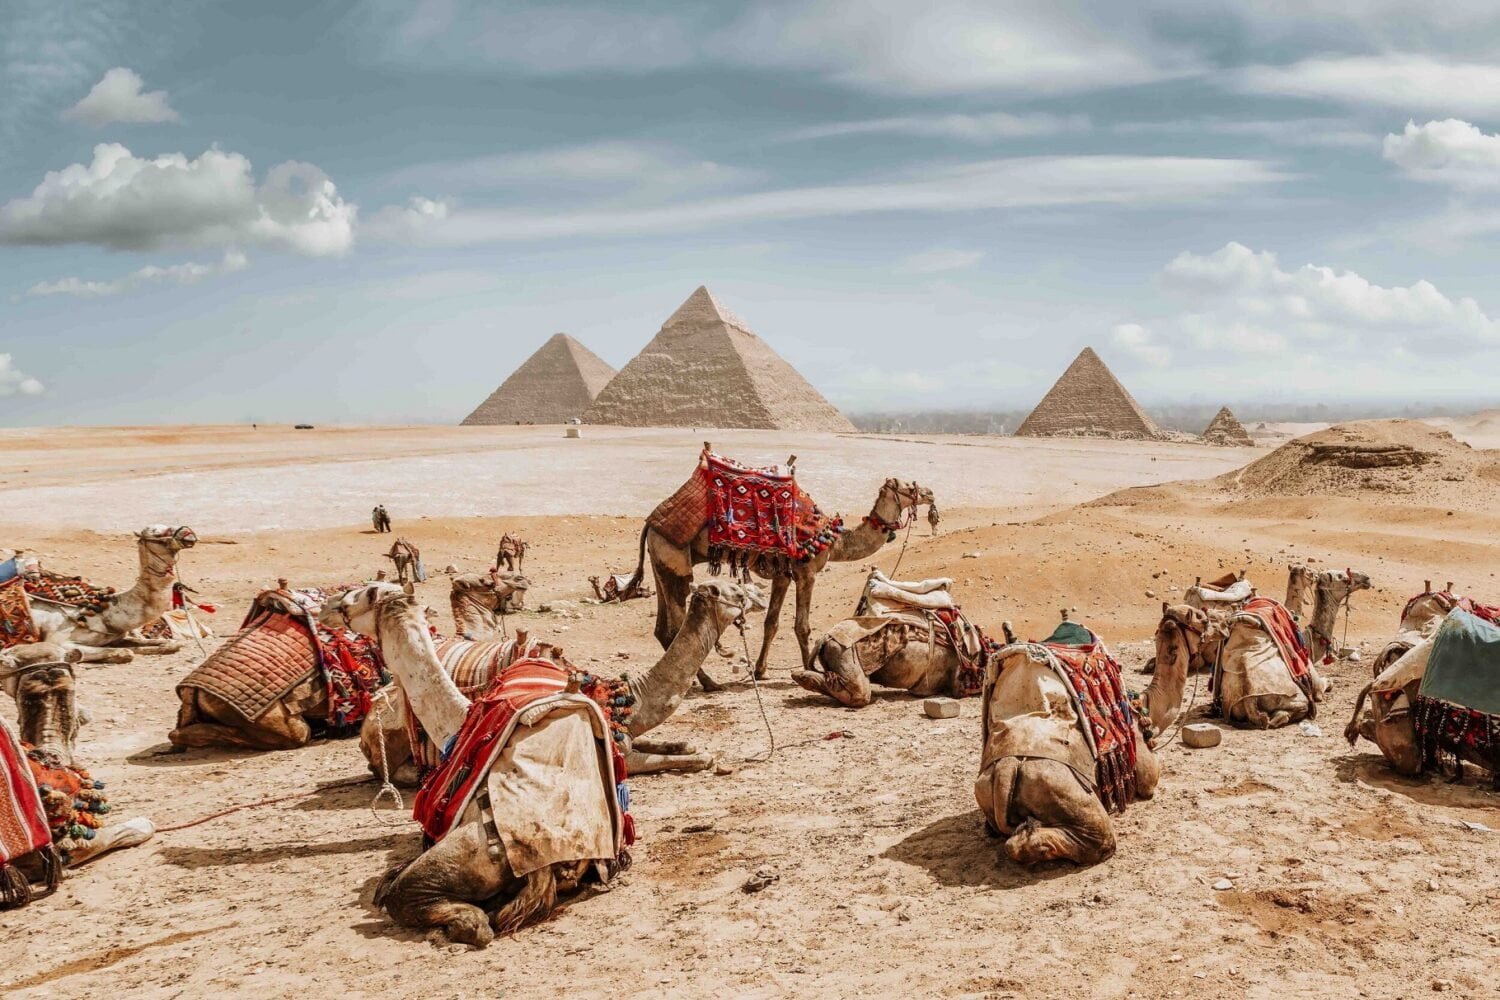 Egypt 4 Day Vacation To Cairo & Luxor From USA